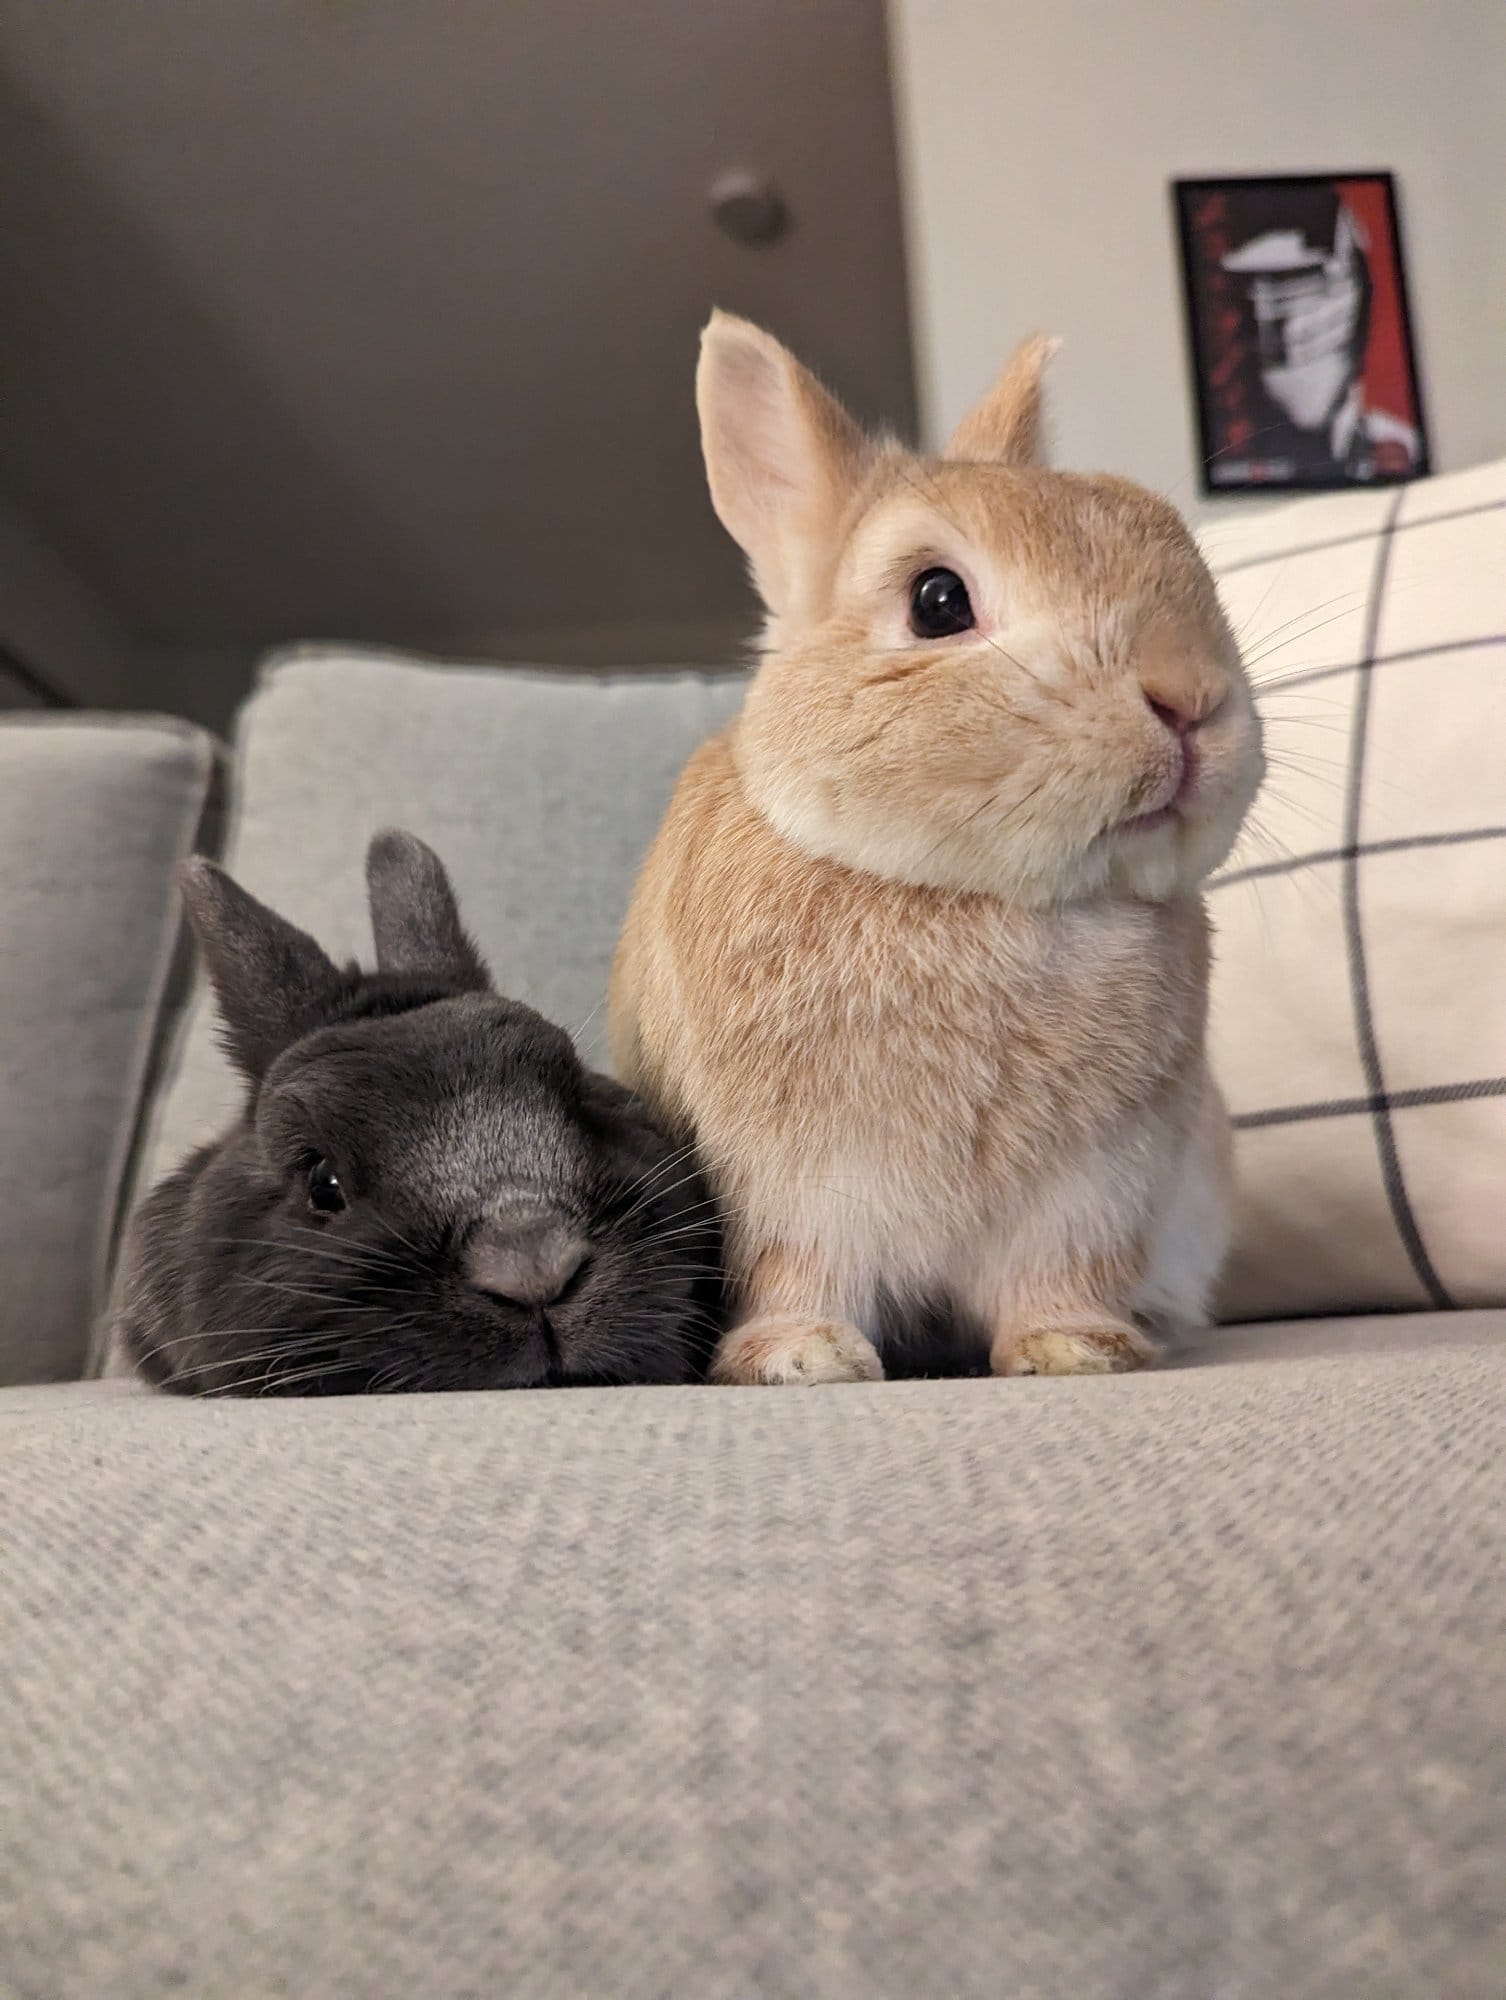 Two rabbits, one black and one tan, peeking over the edge of a grey sofa with a framed picture hanging in the background